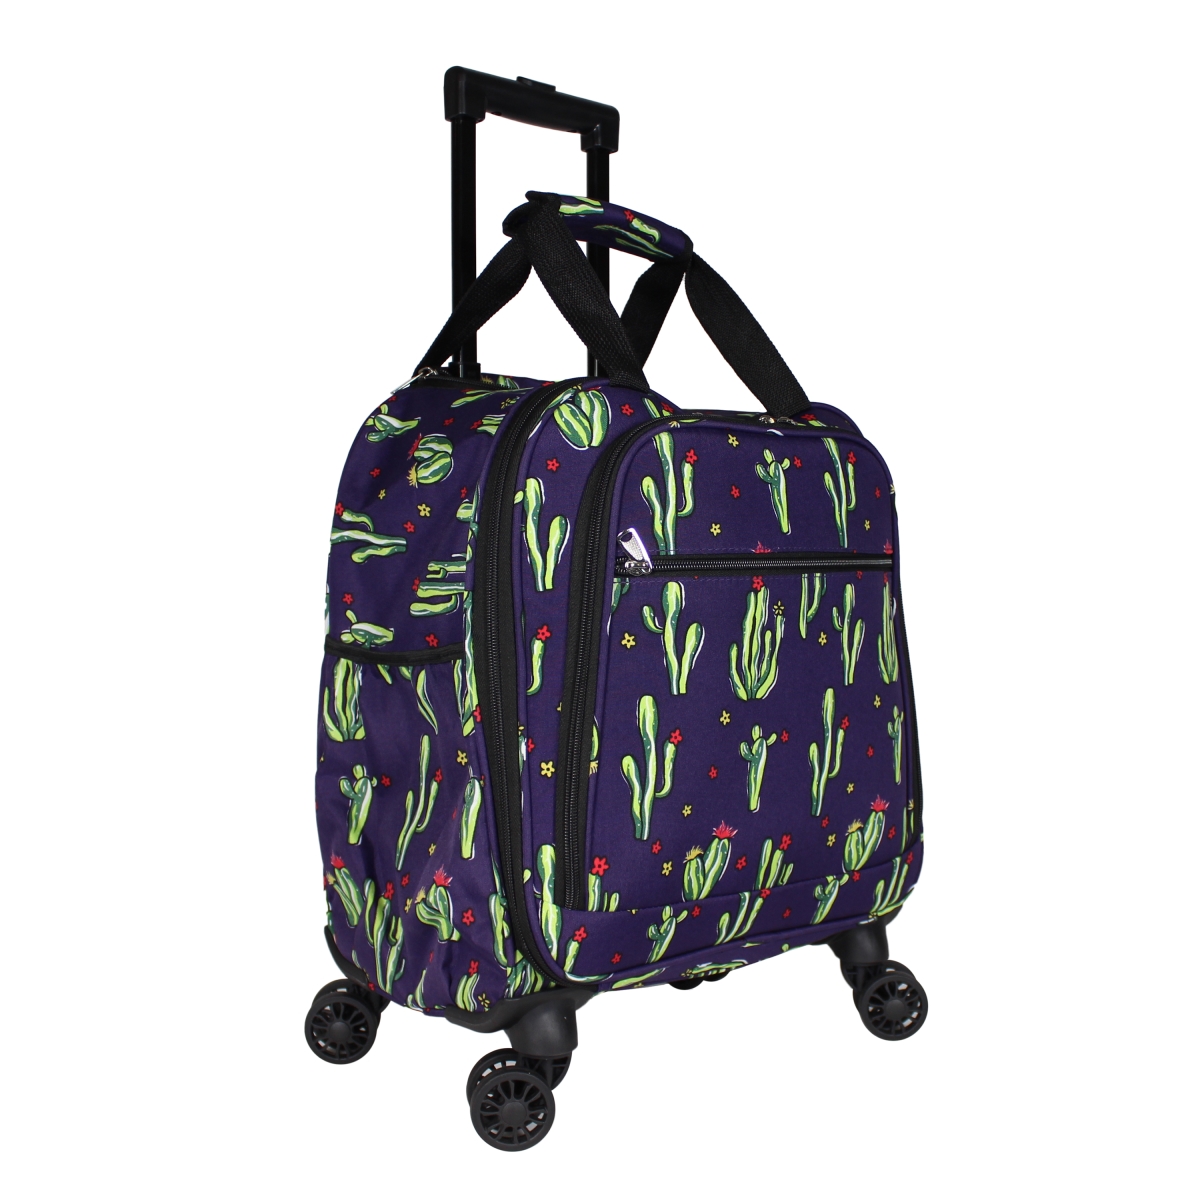 815501-242 18 In. Prints Spinner Carry-on Luggage, Cactus Purple